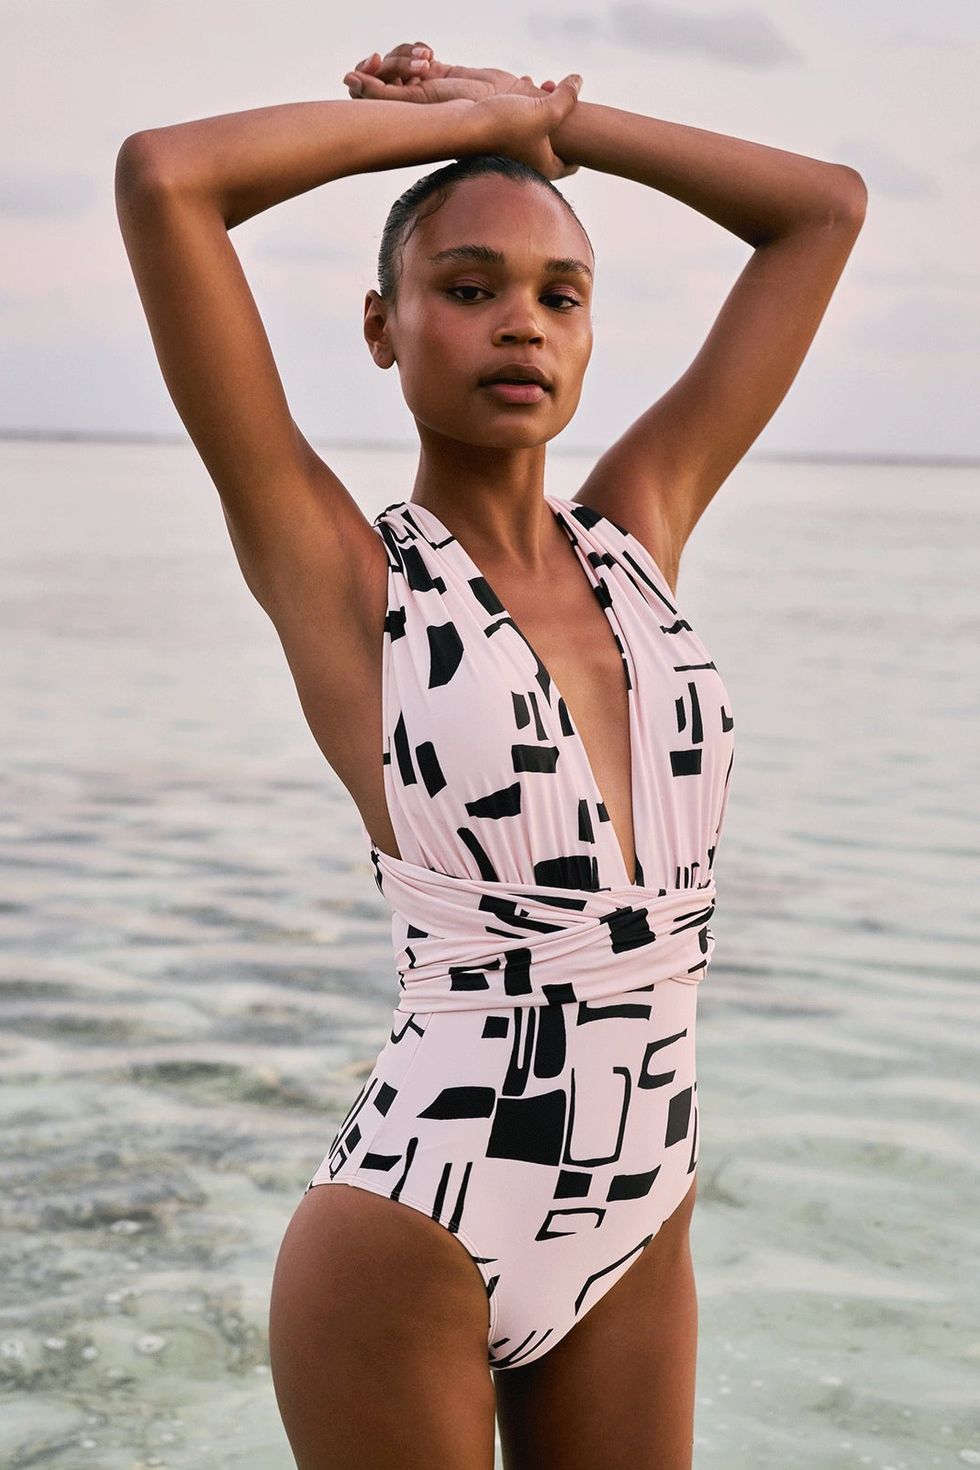 Shop our selection of women's one-piece and two-piece swimwear